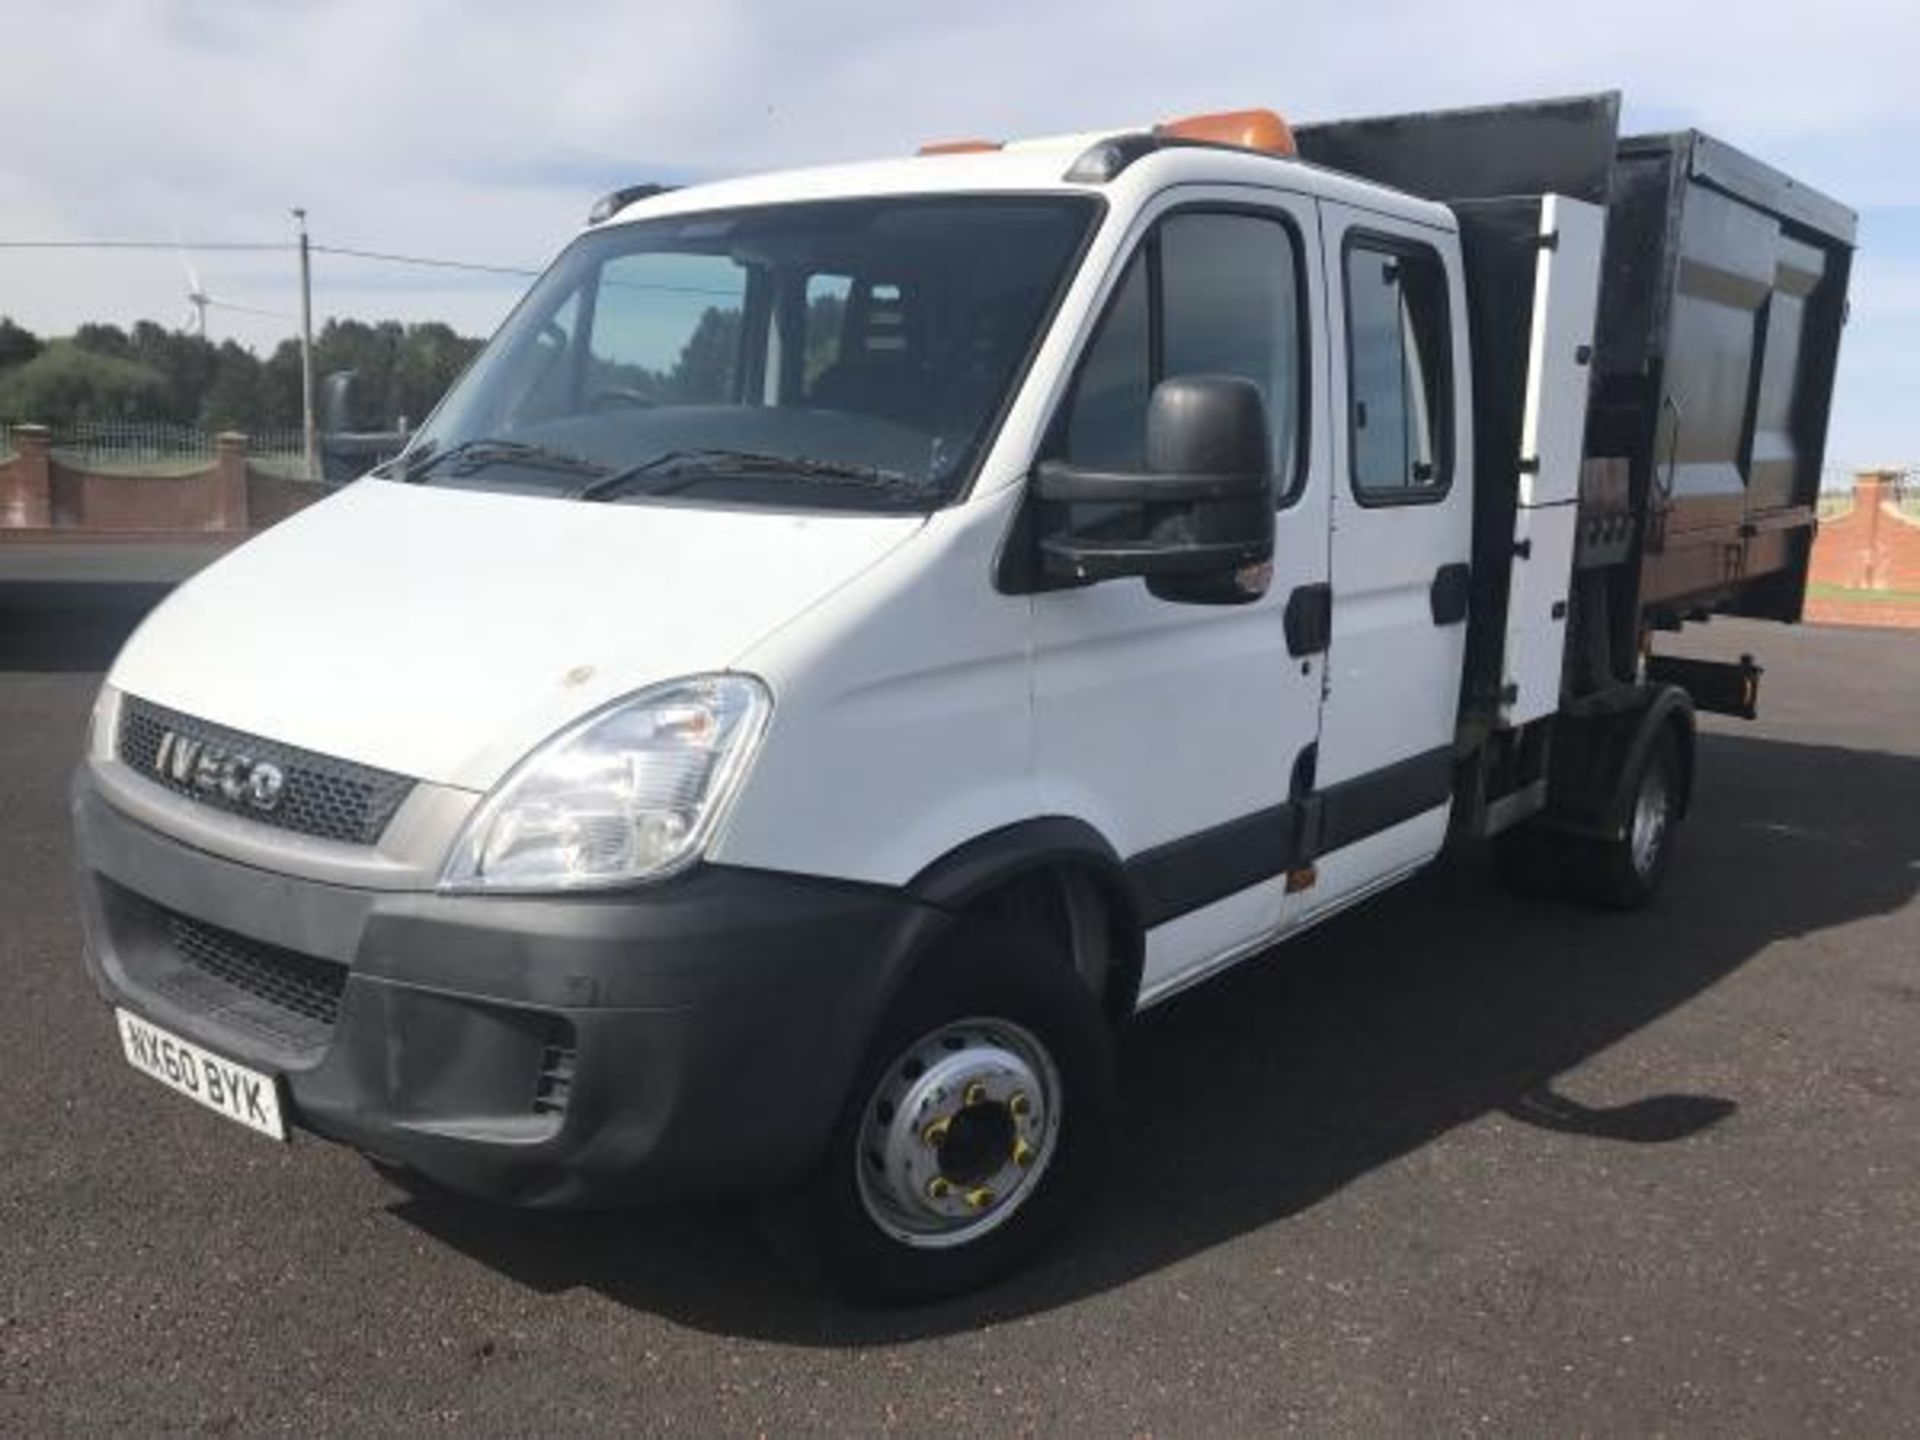 2010/60 REG IVECO DAILY 70C17 7 TON CREW CAB TIPPER WITH SIDE BIN LIFT REFUSE TRUCK *PLUS VAT* - Image 2 of 17